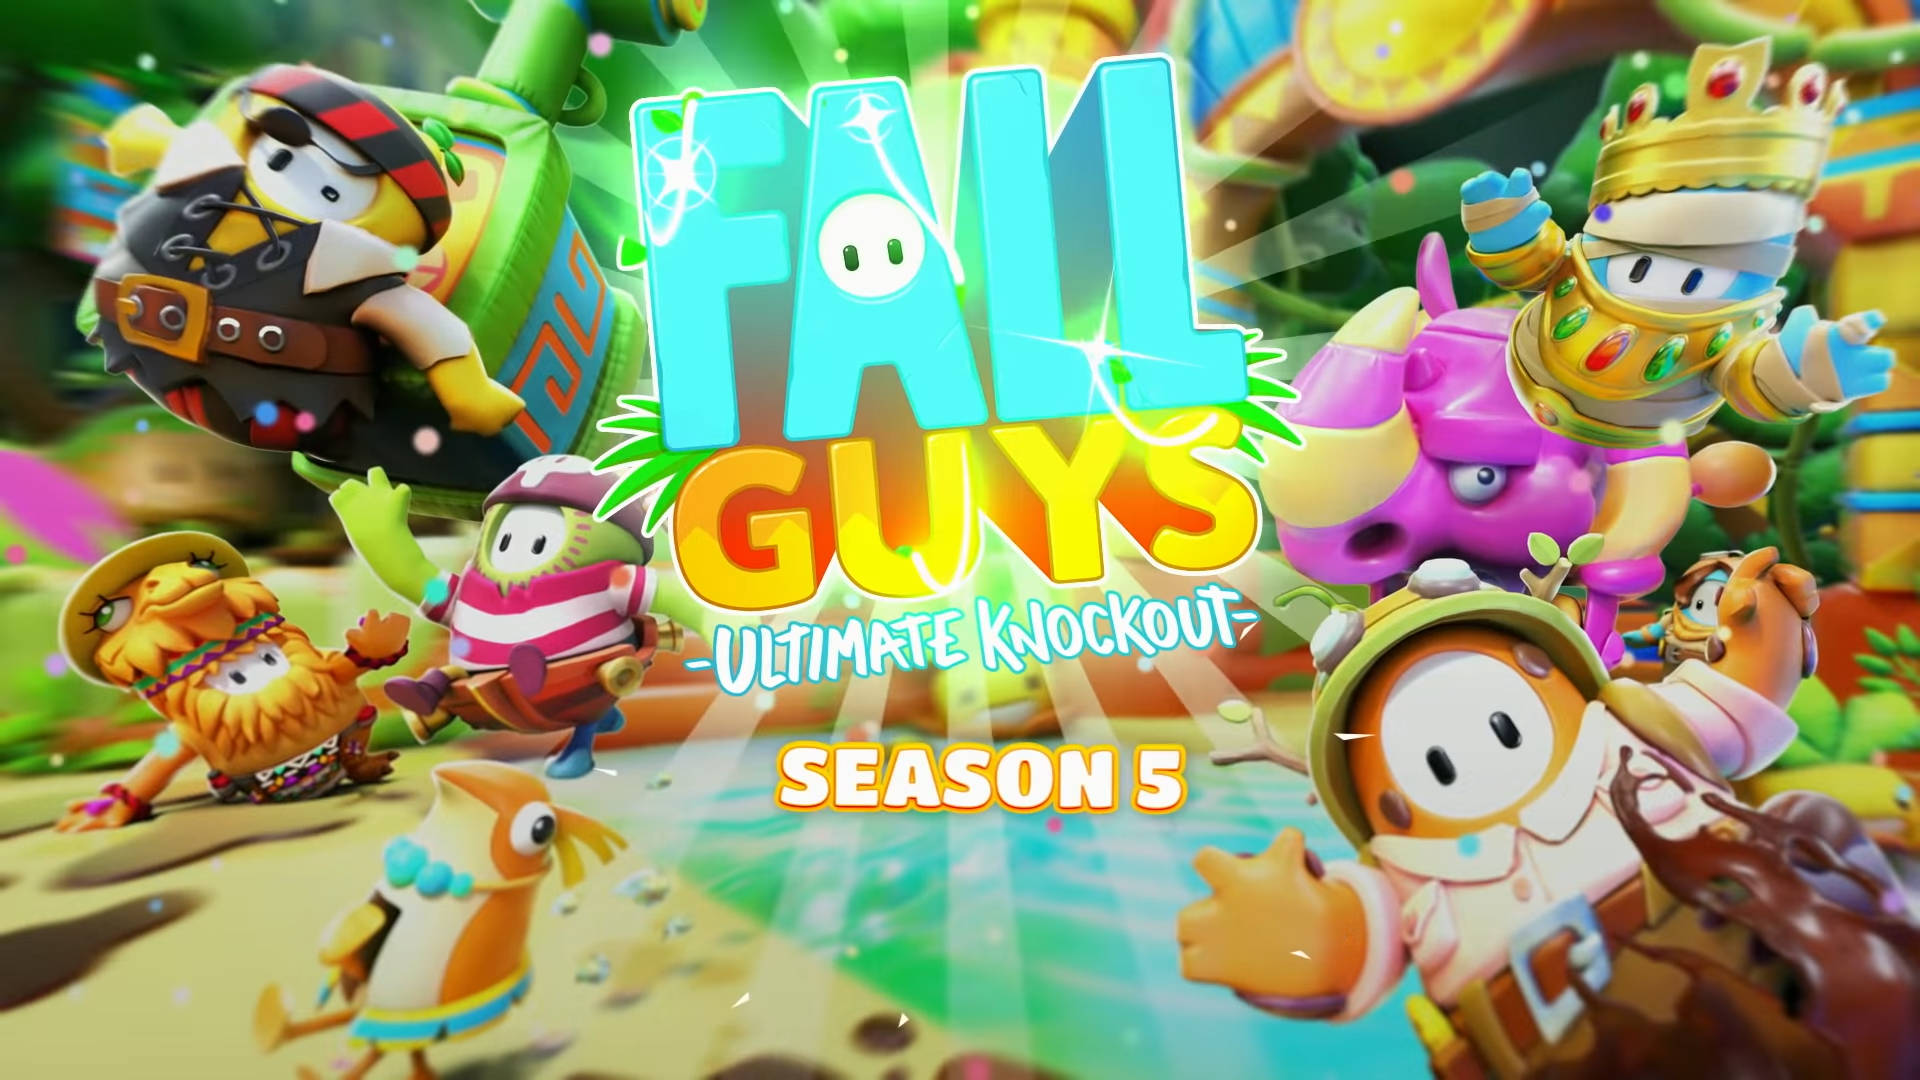 Fall Guys Ultimate Knockout Season 5 Game Poster Background